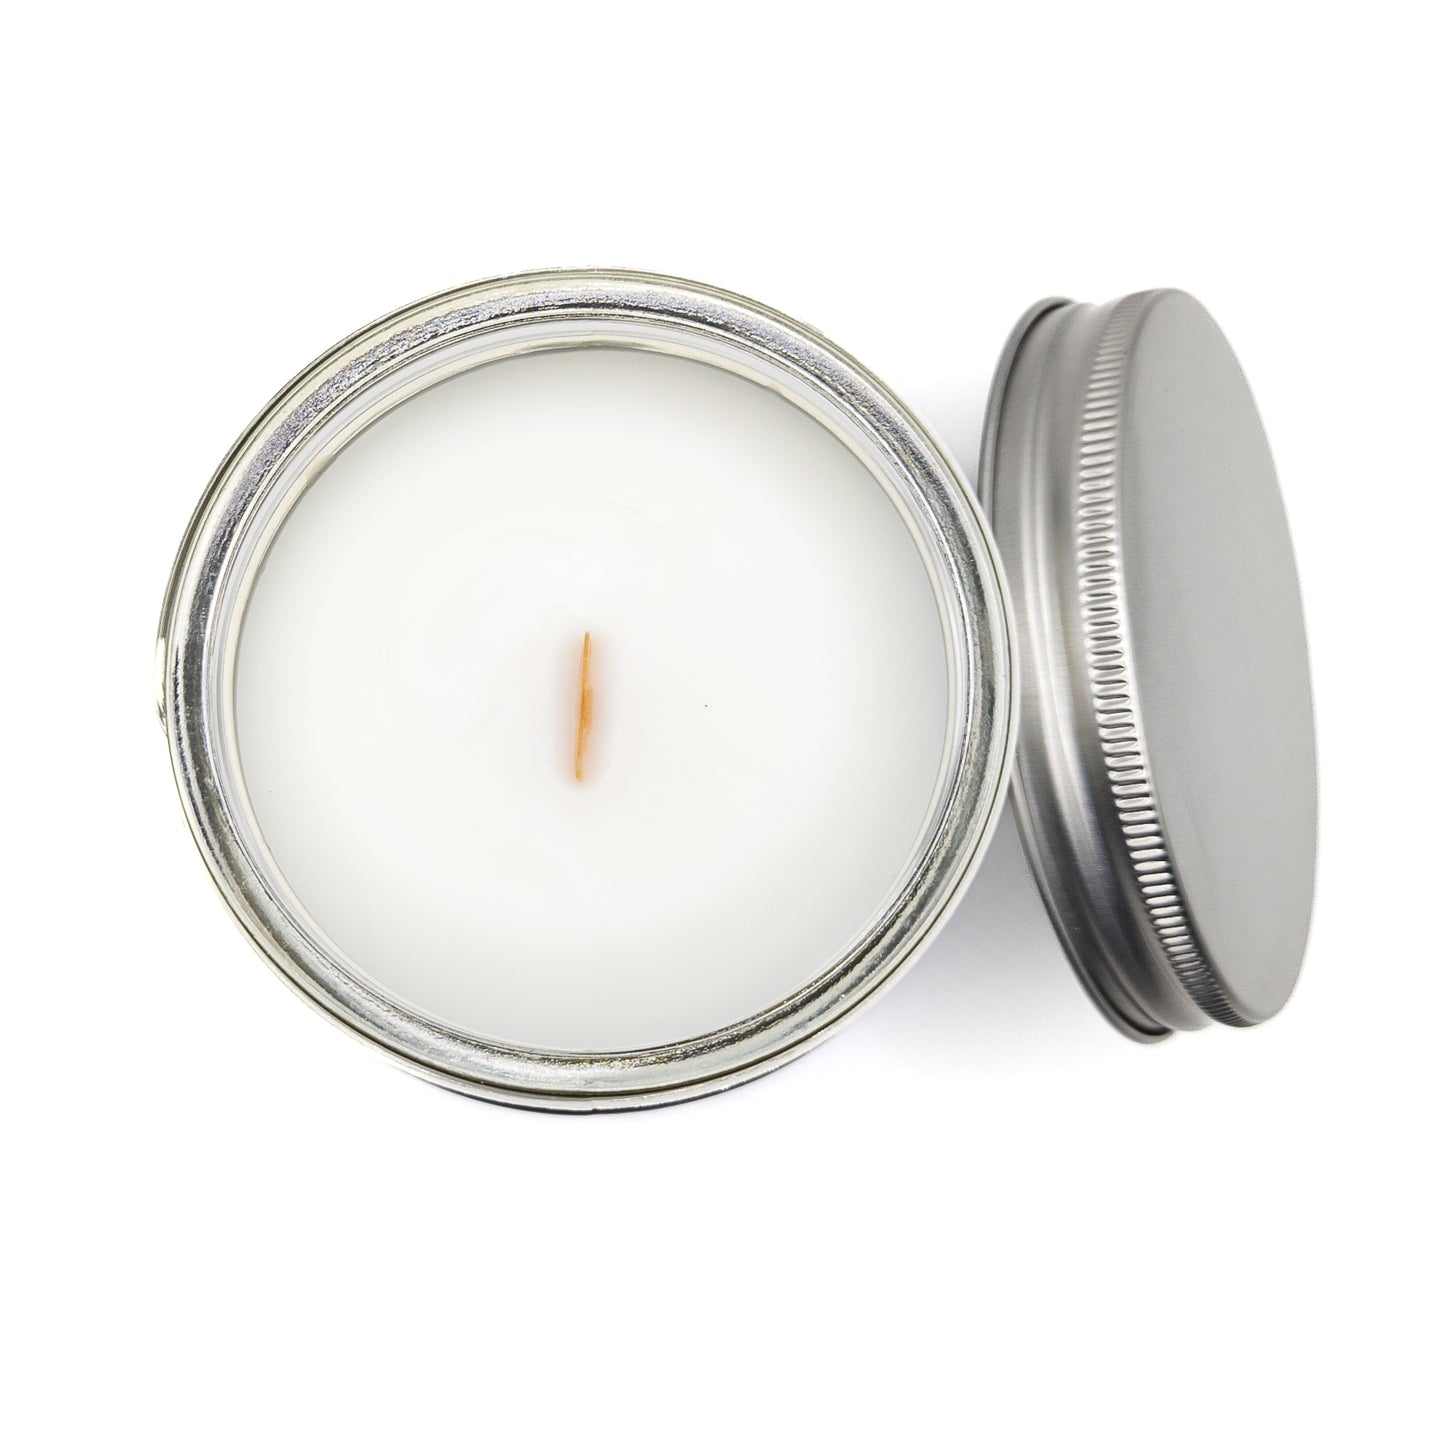 Coconut apricot luxury wax blend with crackling wooden wick